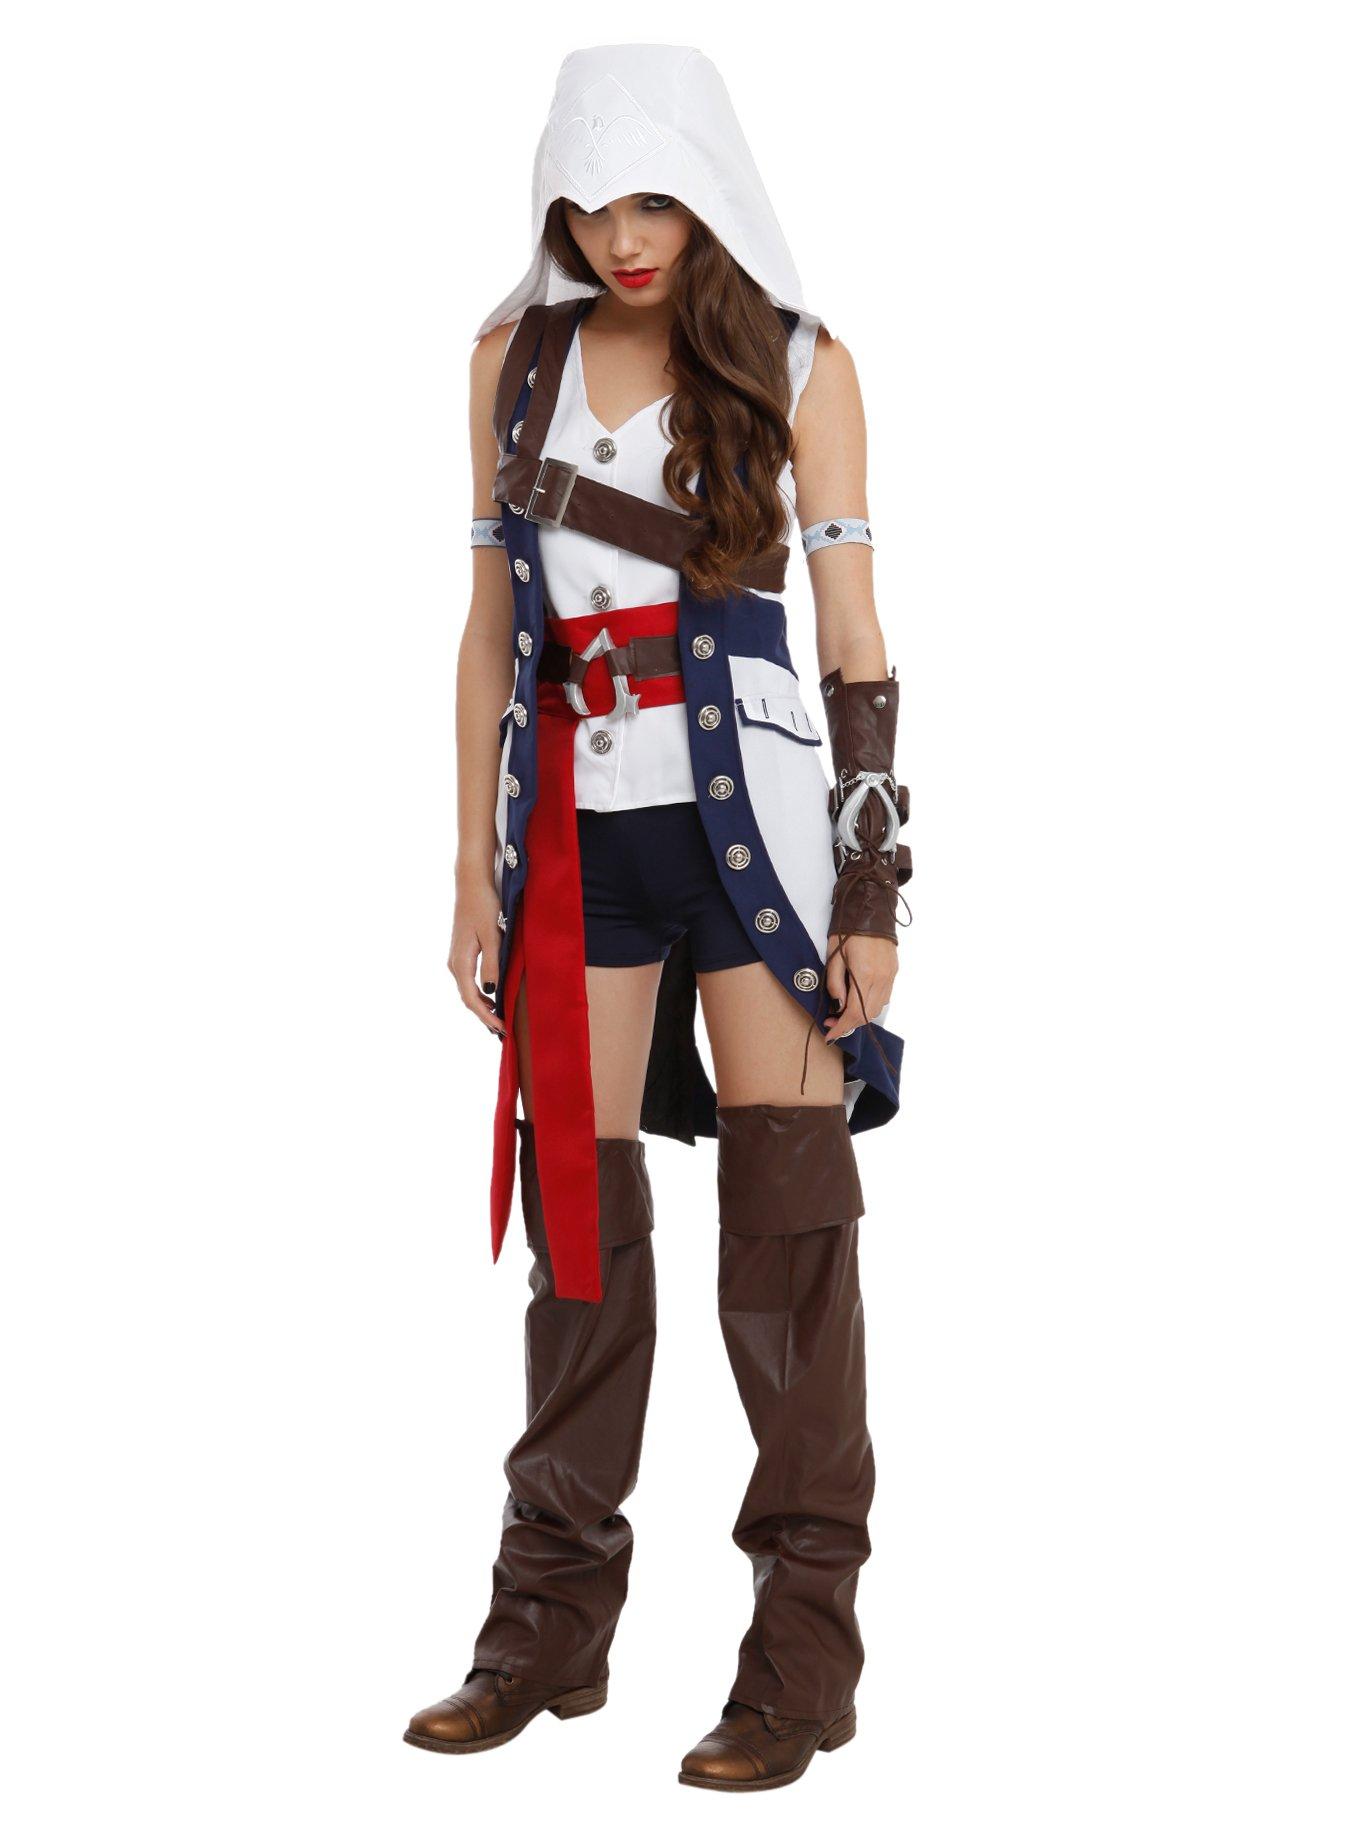 Top 10 Best Video Game Costumes You Can Purchase  Video game costumes, Assassins  creed funny, Assassins creed 2